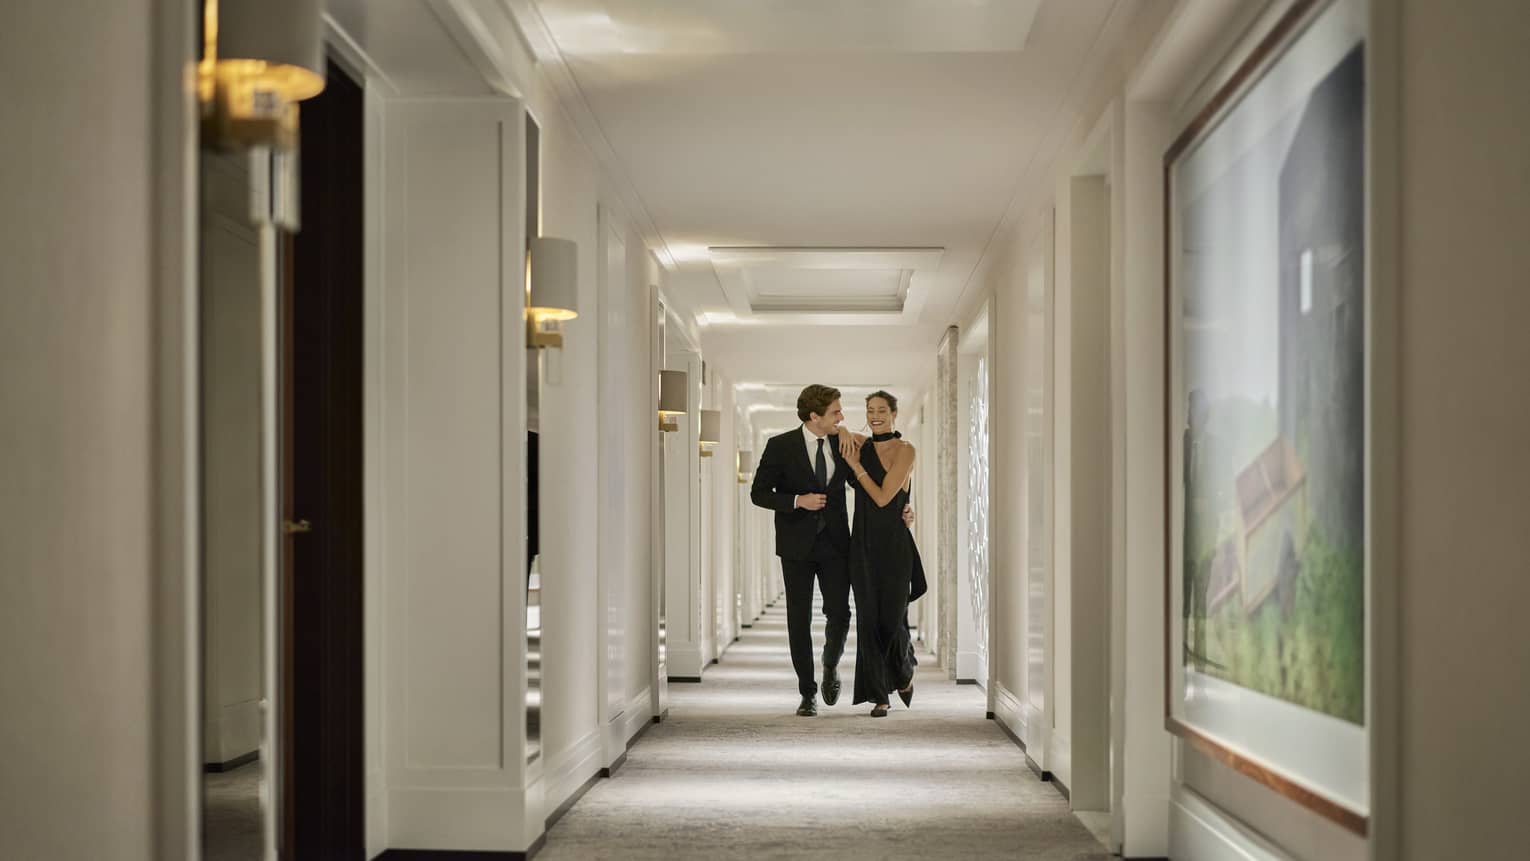 A couple elegantly dressed in formal attire walks arm in arm down a hotel hallway. The hallway is adorned with modern lighting and framed artwork, creating an upscale and sophisticated atmosphere.